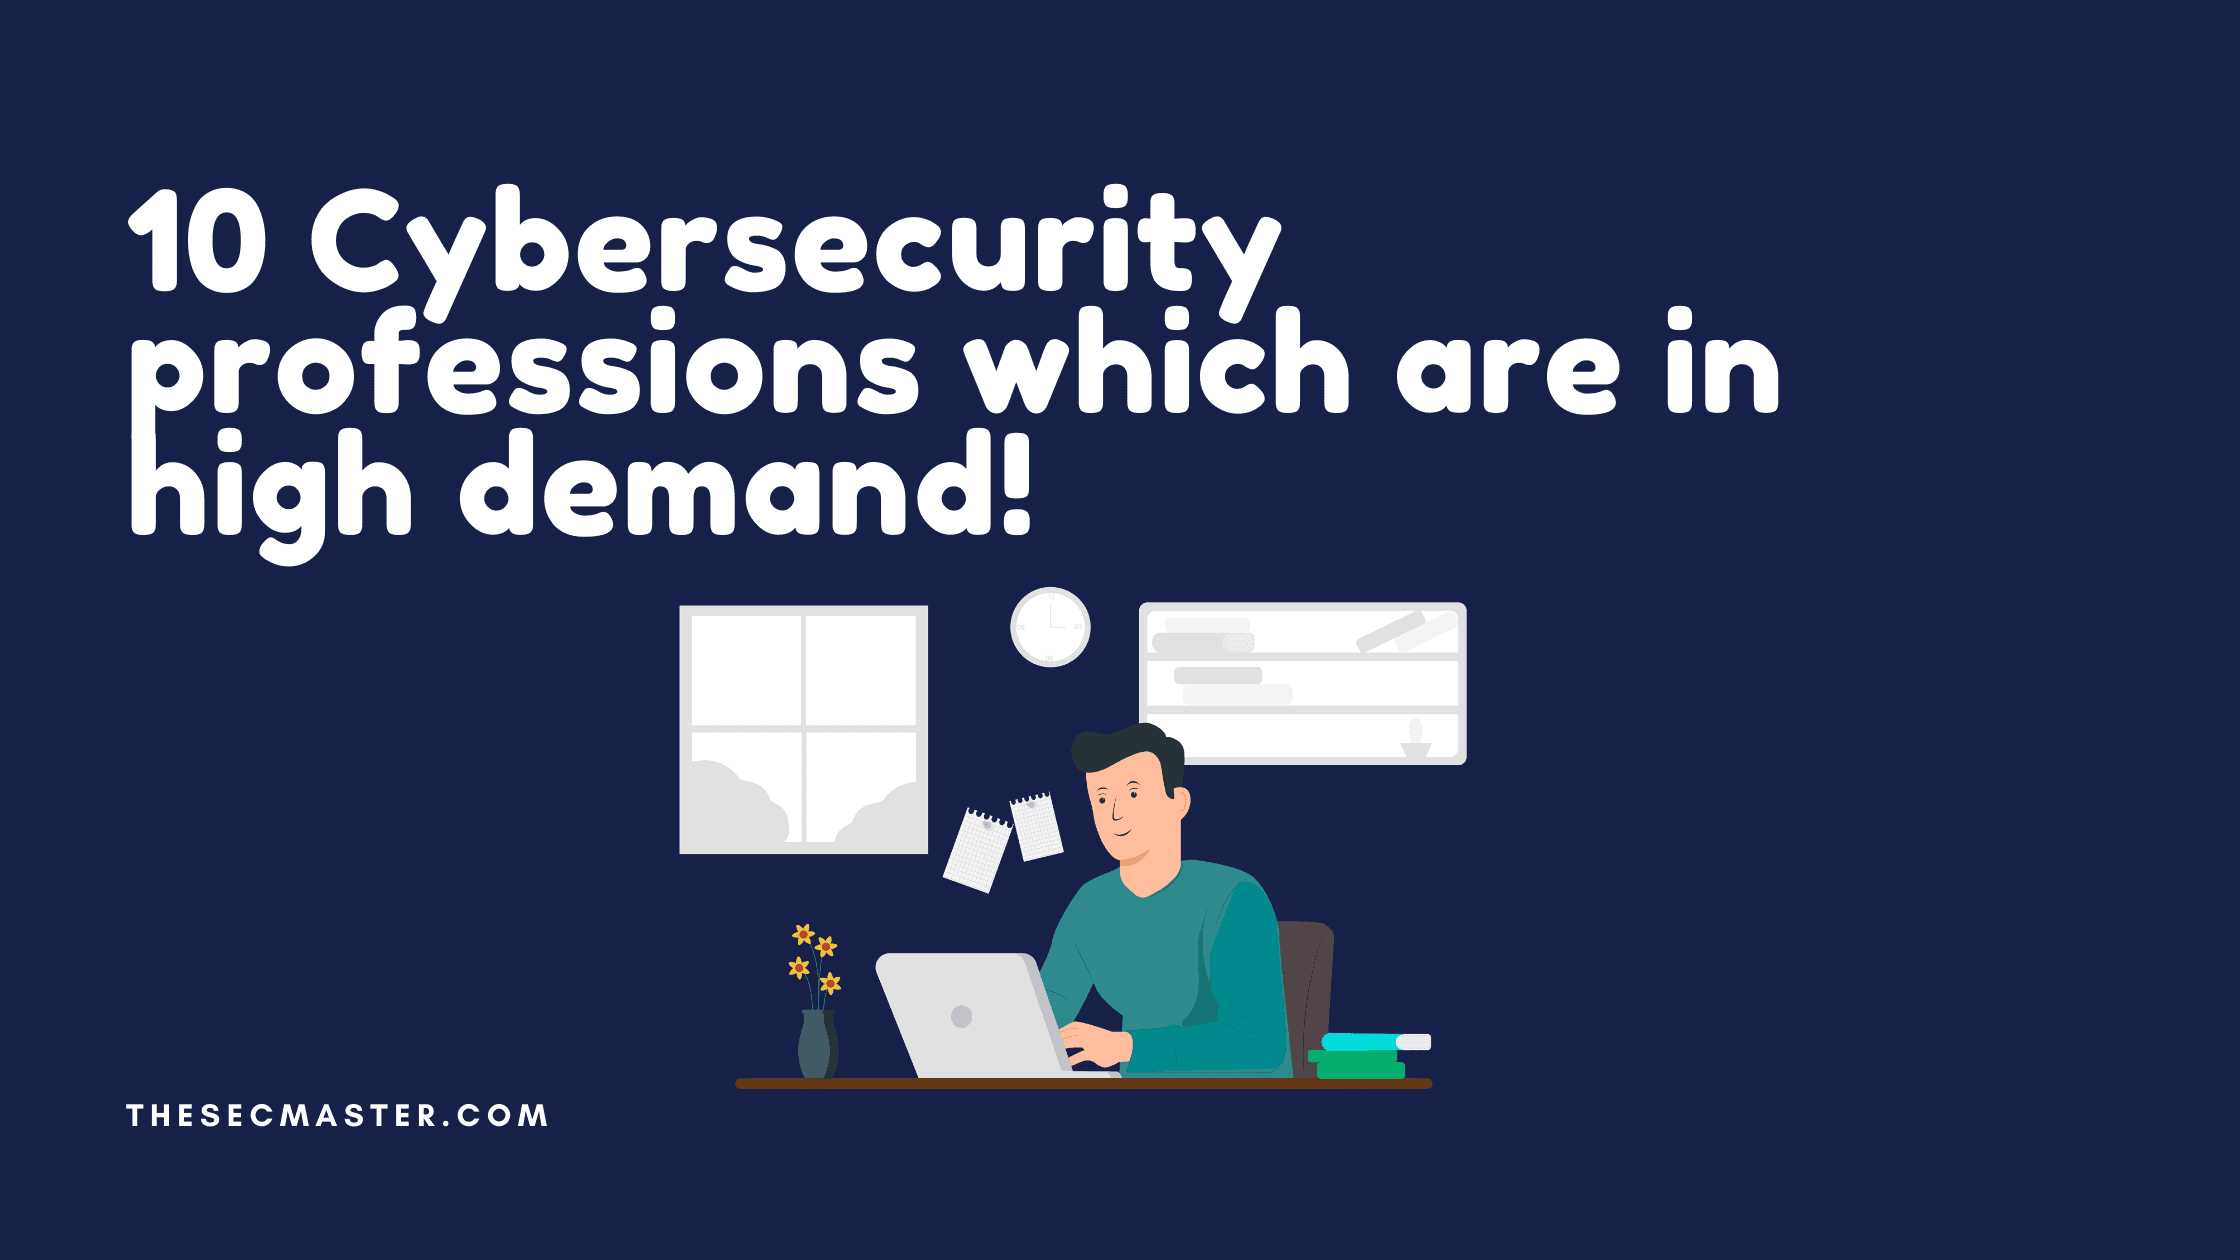 10 Cybersecurity Professions Which Are In High Demand